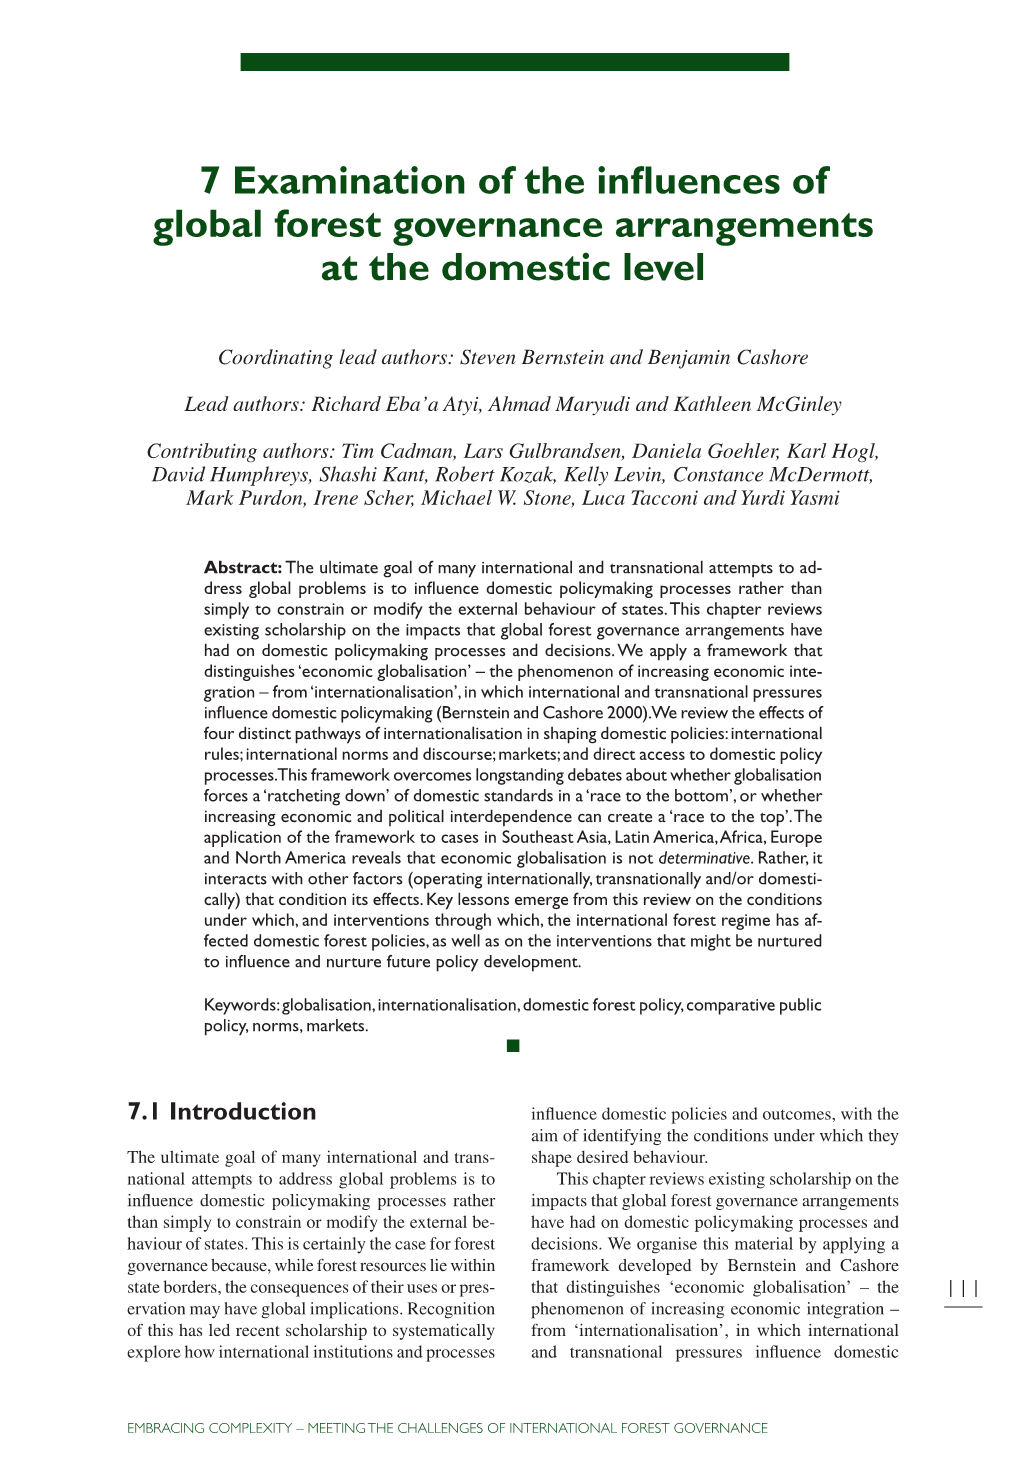 7 Examination of the Influences of Global Forest Governance Arrangements at the Domestic Level